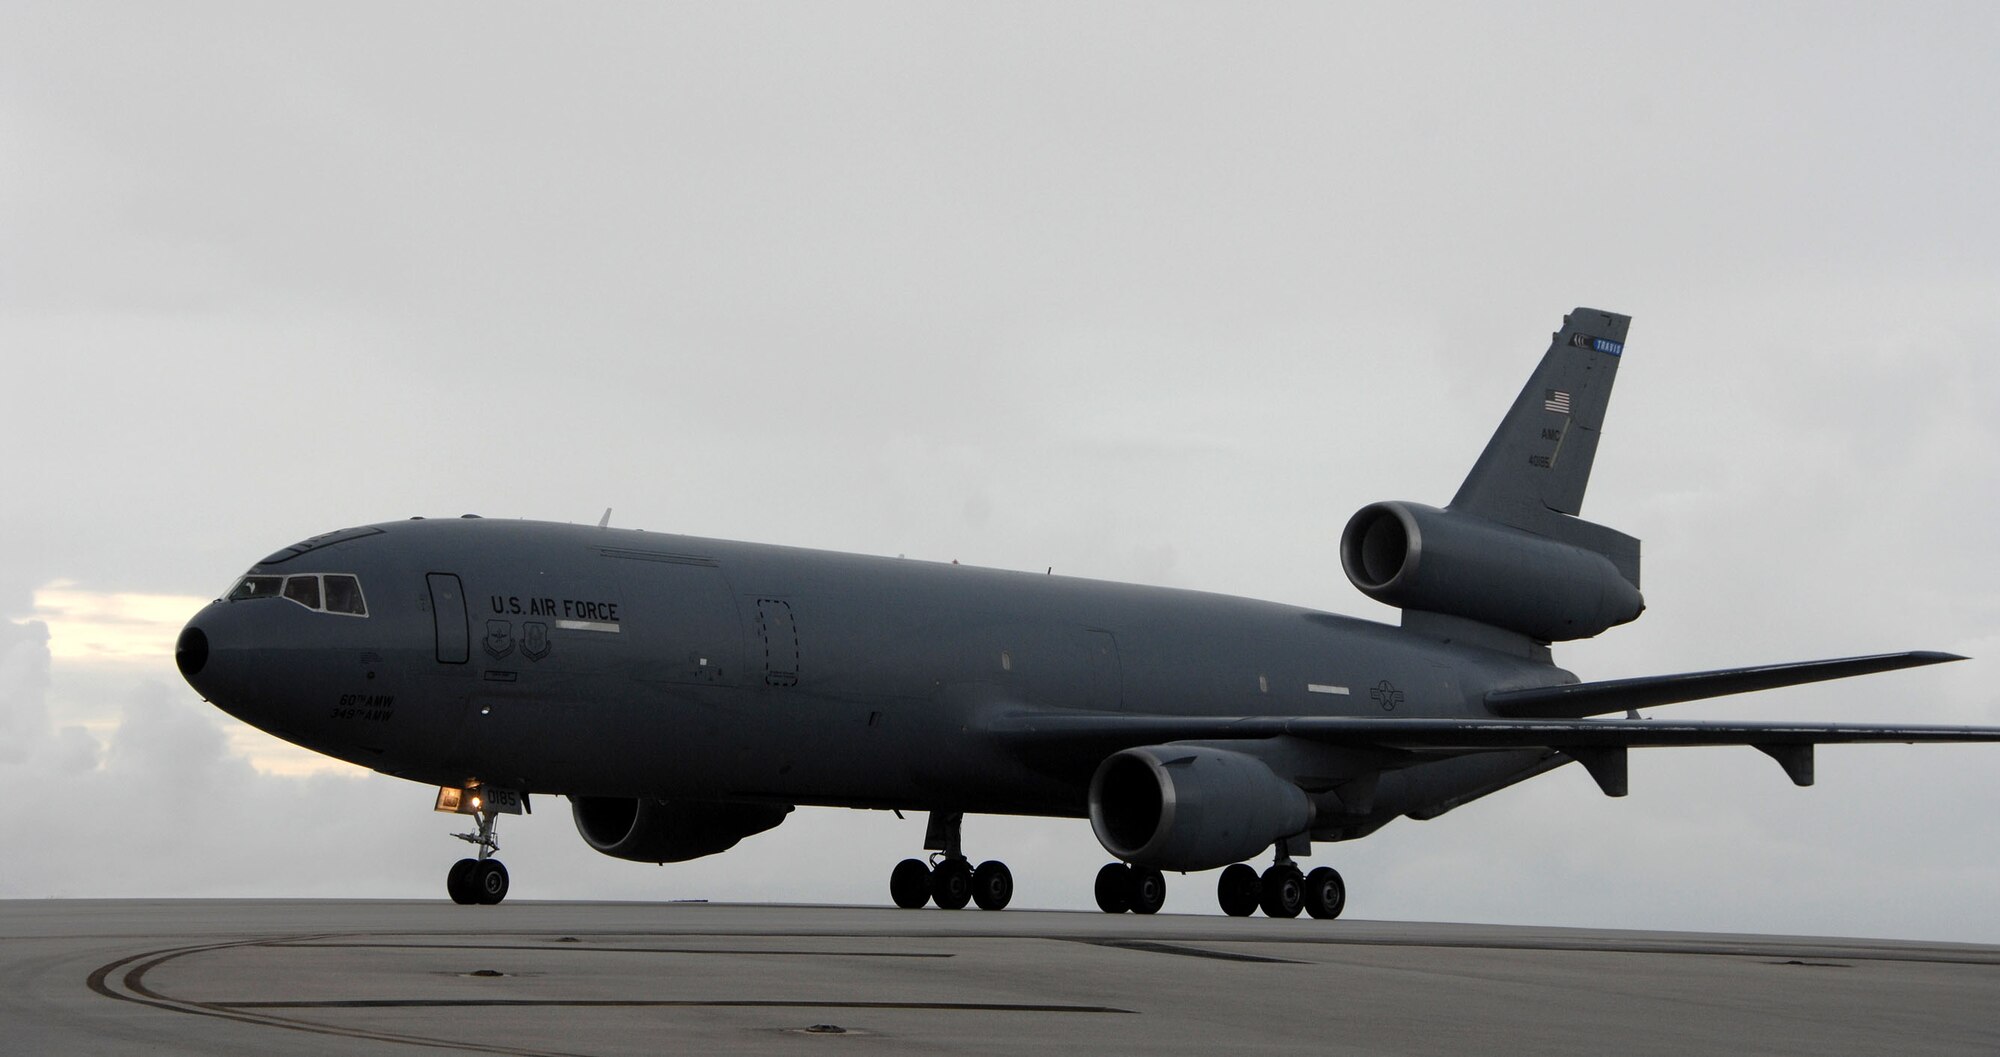 A U.S. Air Force KC-10 Extender waits for instructions to depart from a runway on Andersen Air Force Base, July 9. The KC-10, from Travis AFB, escorted six F/A-18's from Naval Air Station Lemoore, Calif.  The fighters used Andersen waypoint on their way to Royal Australian Air Force Base Tindal where they will participate in an exercise with the Australians. (U.S. Air Force photo by Airman 1st Class Courtney Witt)